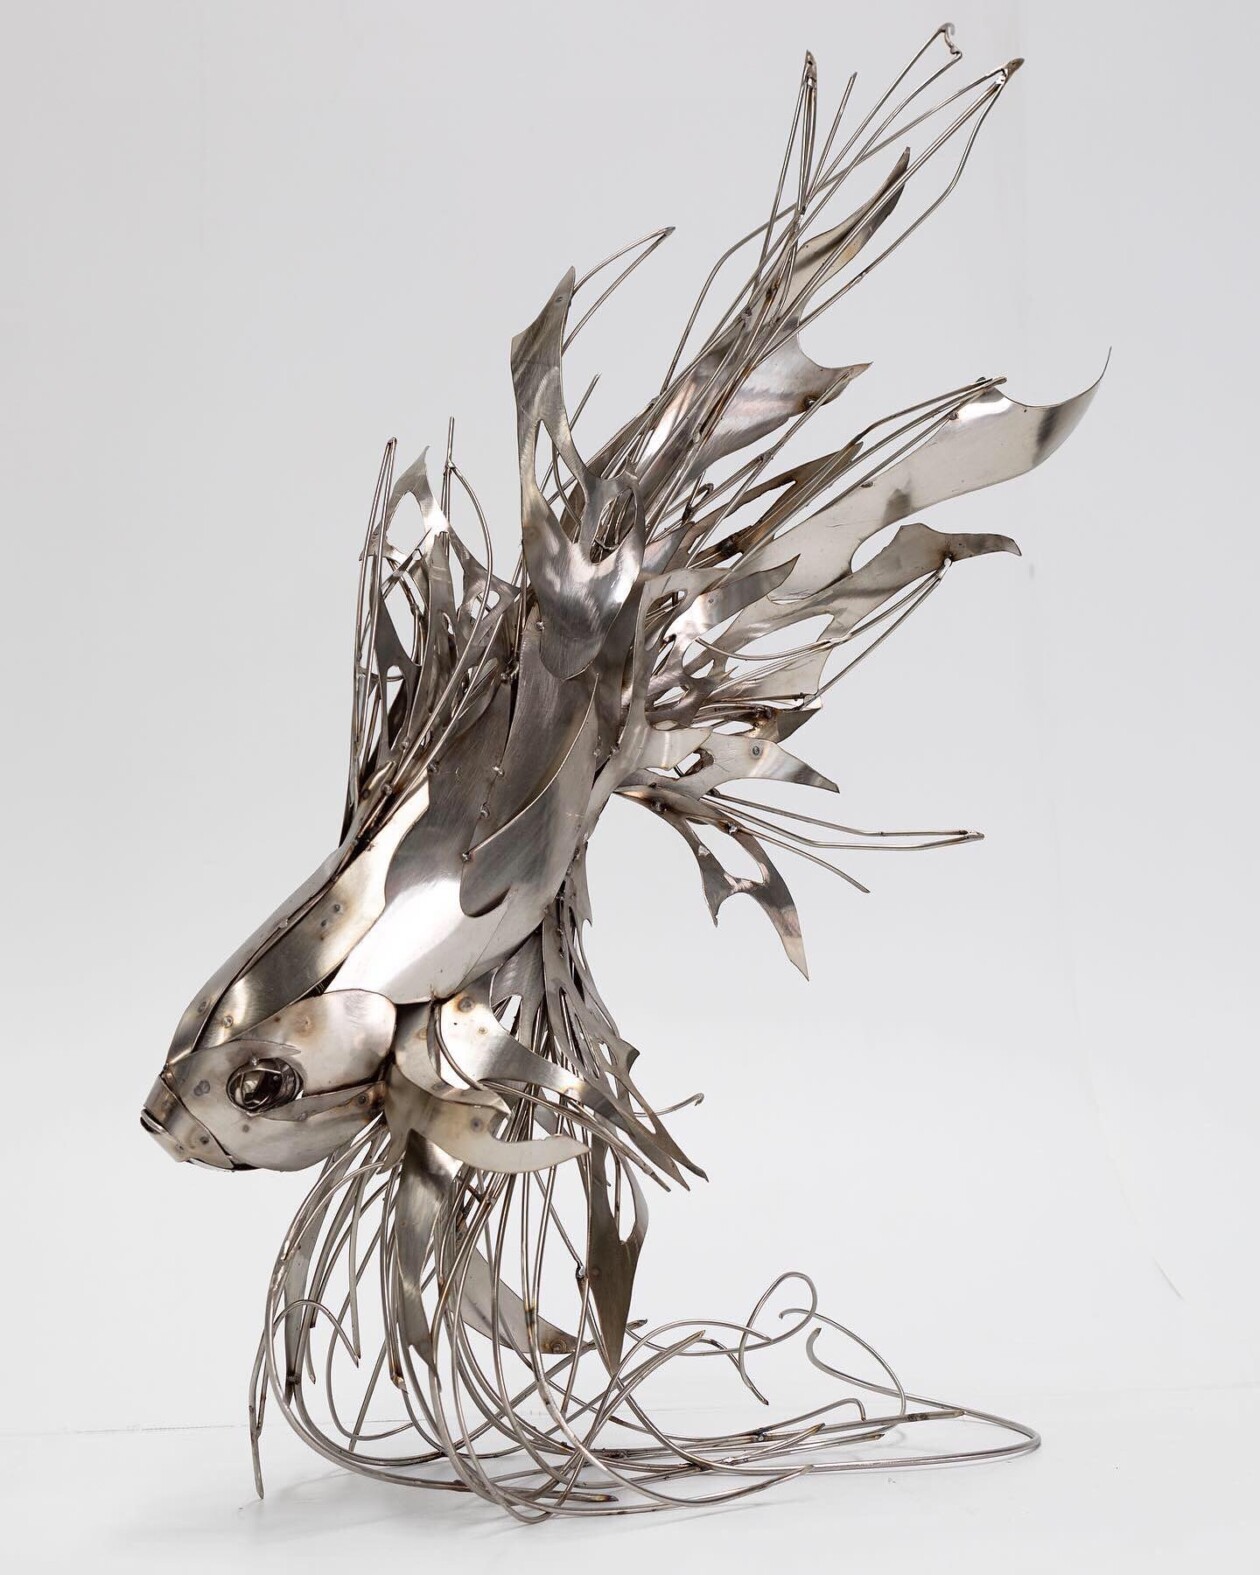 Magnificent Metallic Animal Sculptures Made With Sweeping Lines By Georgie Seccull (22)